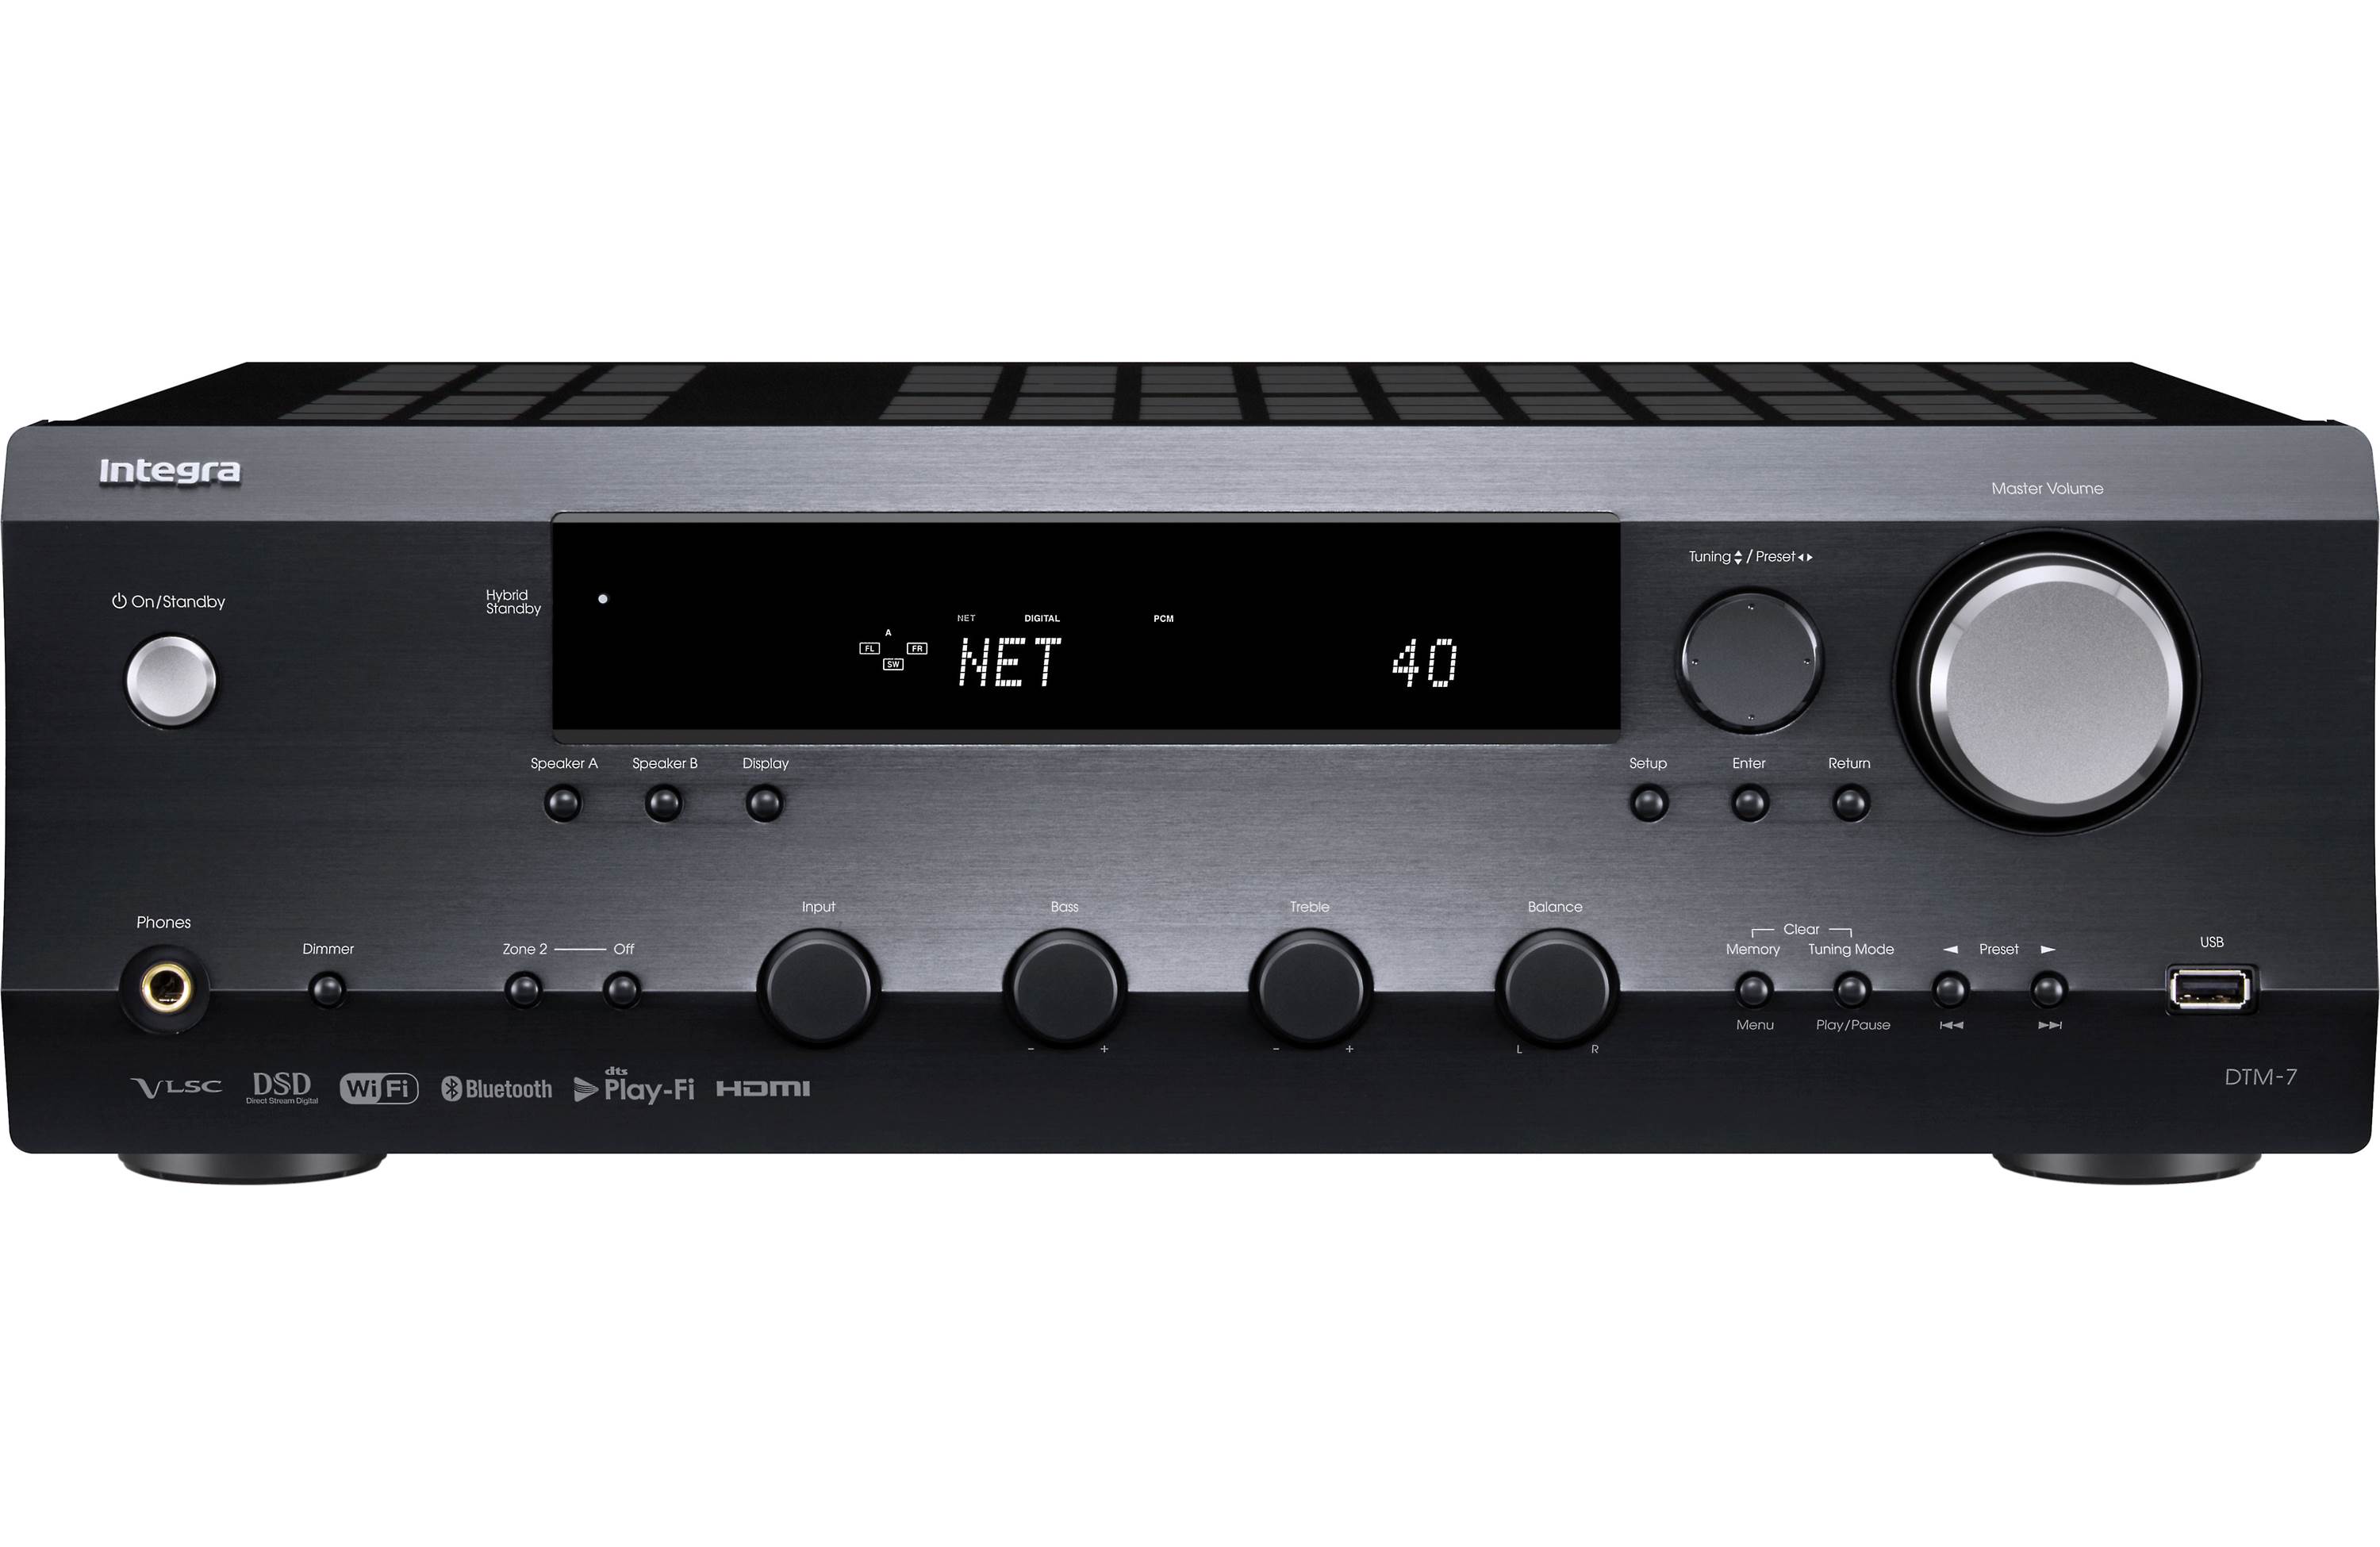 Integra DTM-7 Stereo receiver with Wi-Fi®, Bluetooth®, Chromecast, and HDMI (available to demo)